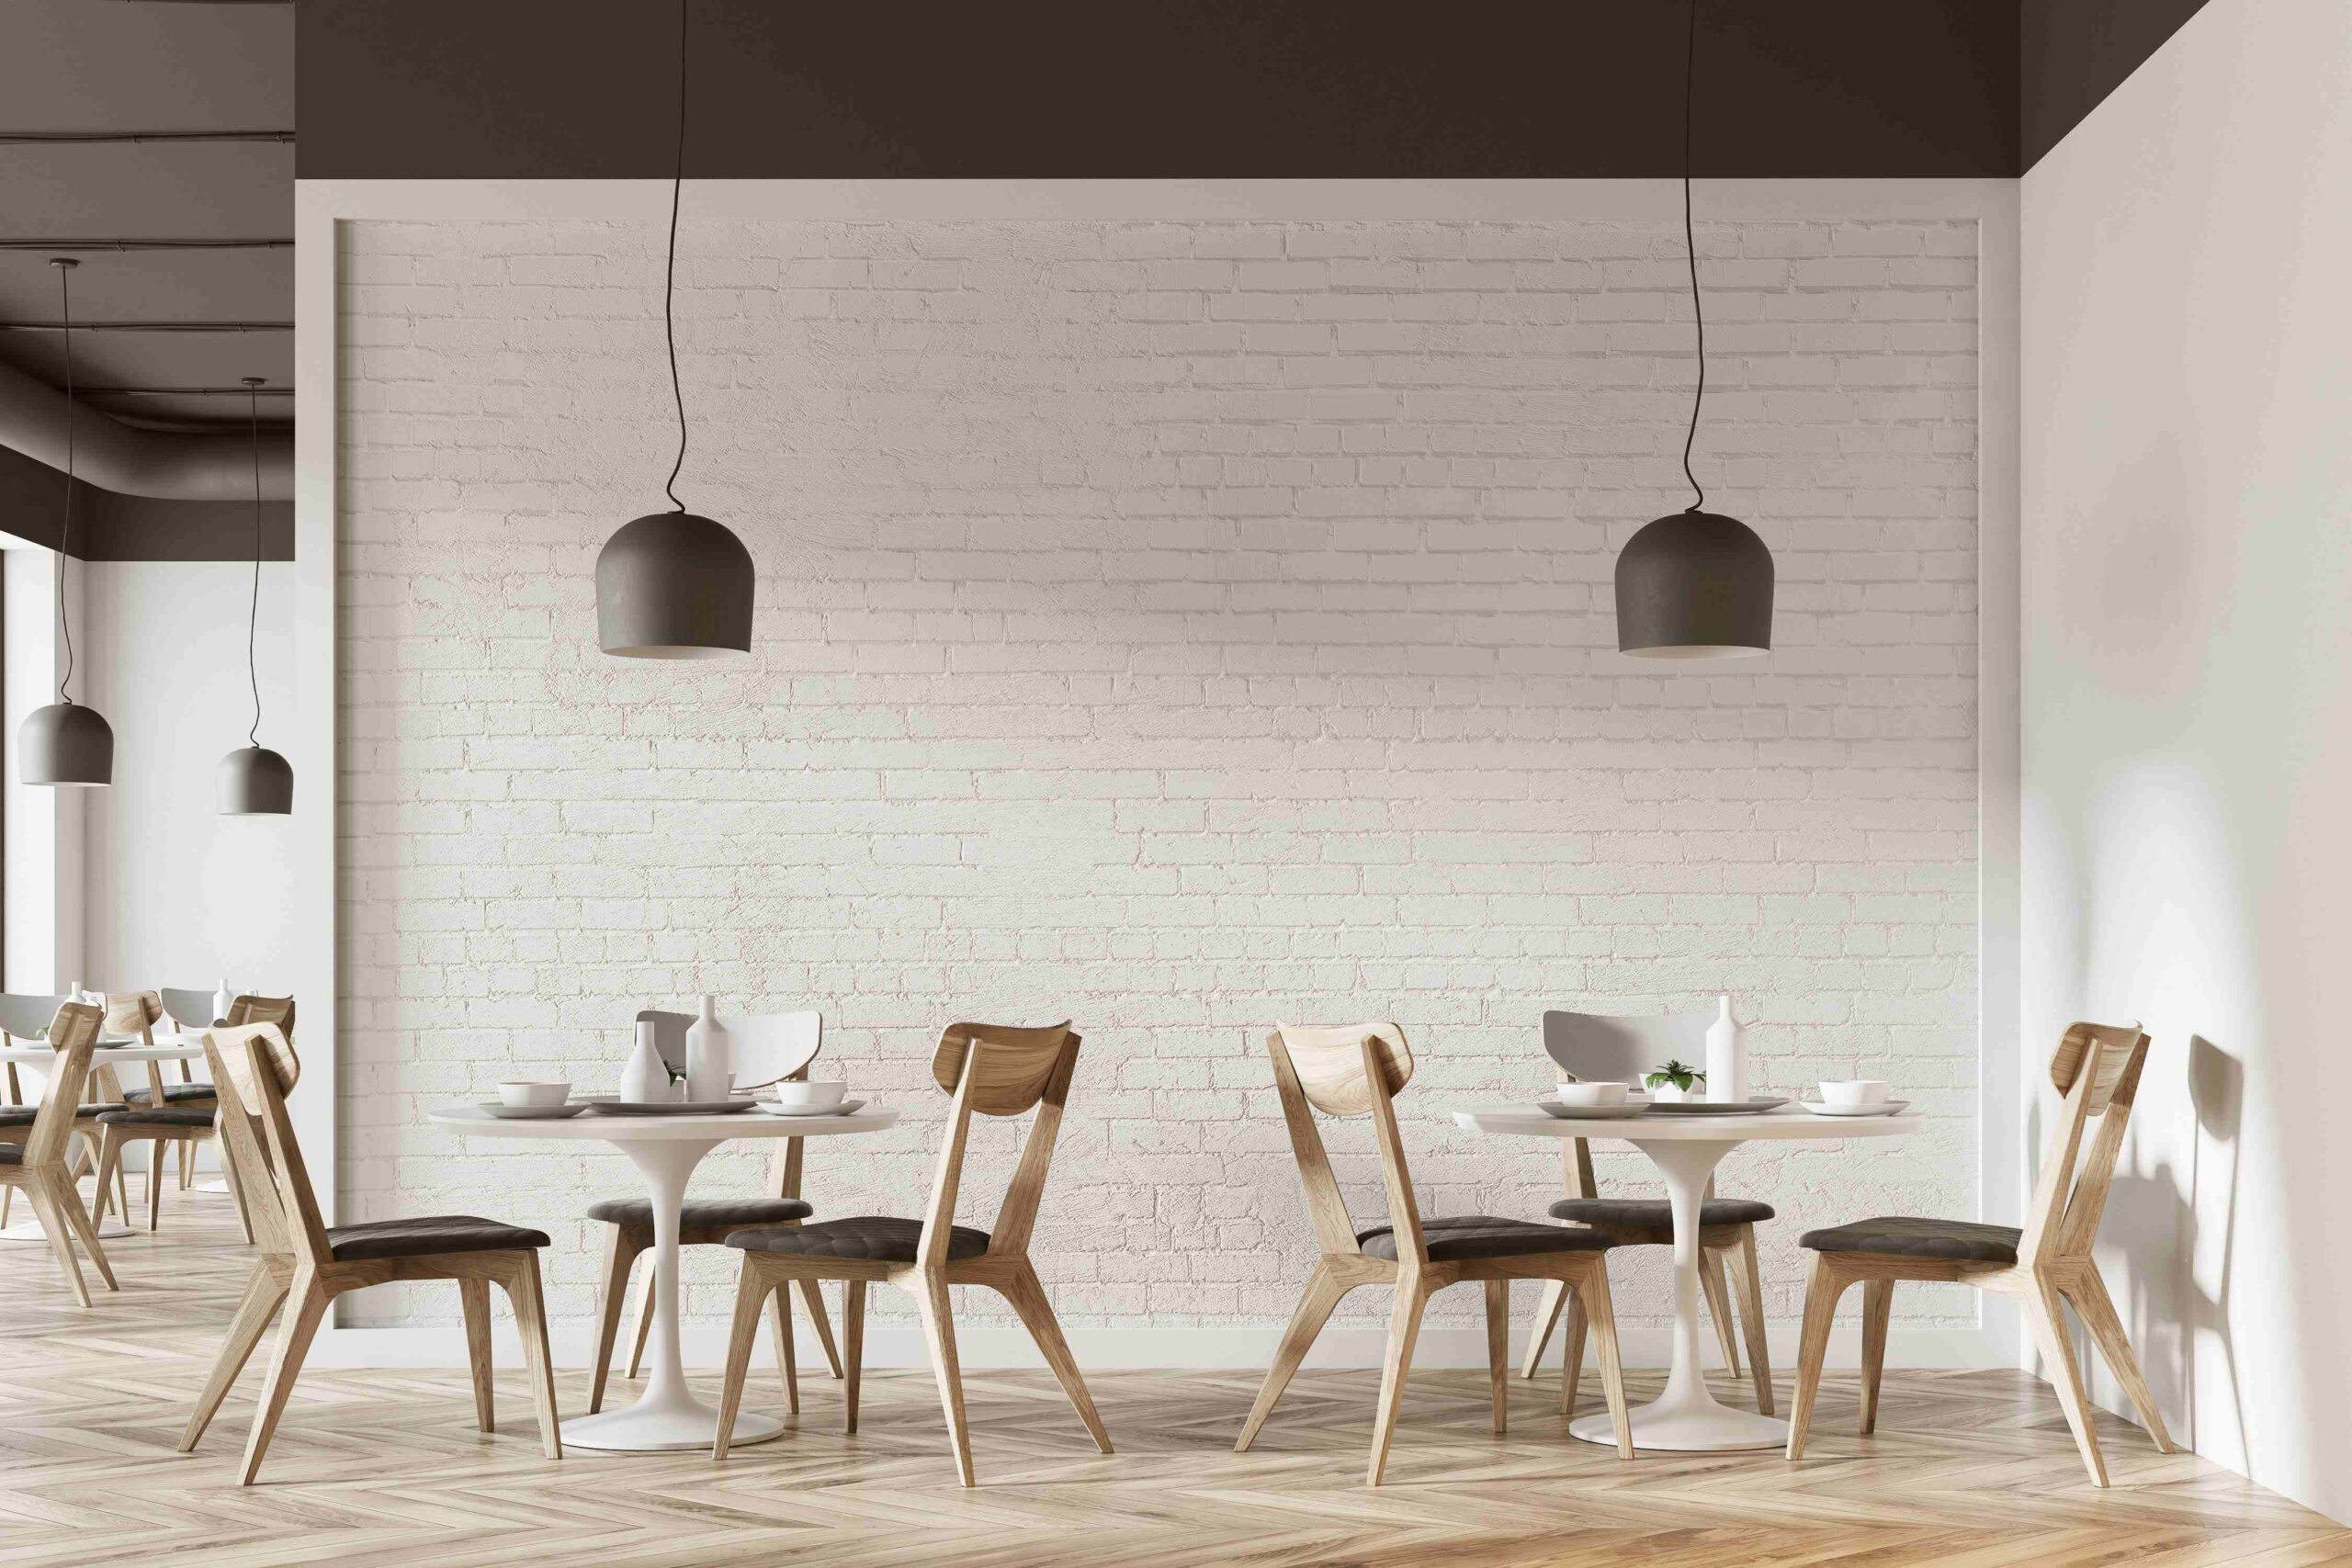 Cafe dining table